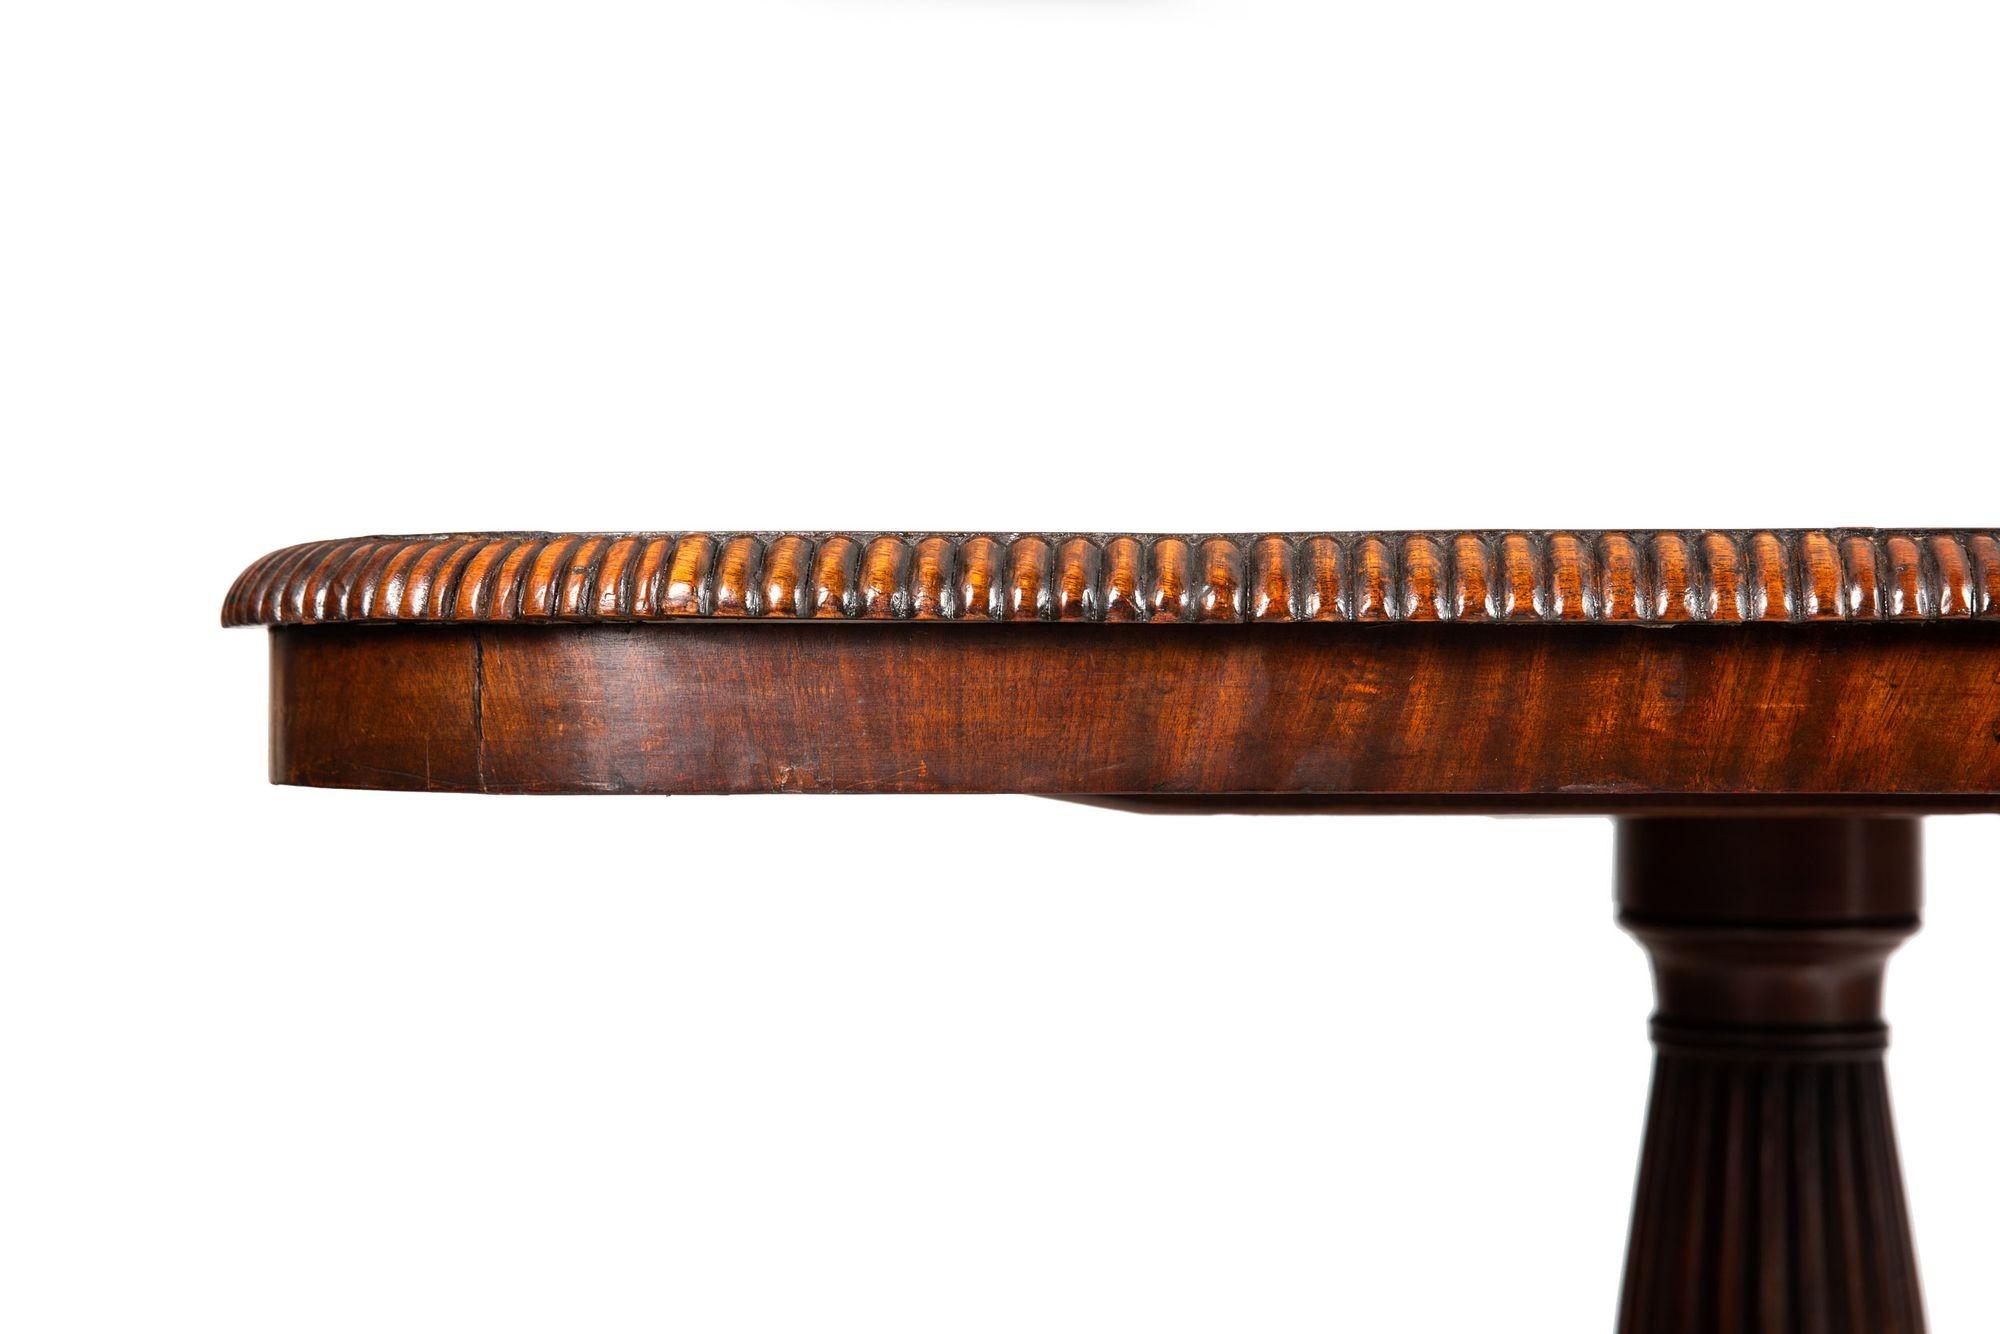 Circa 1840 English William IV Flame Mahogany Tilting Breakfast Table For Sale 9